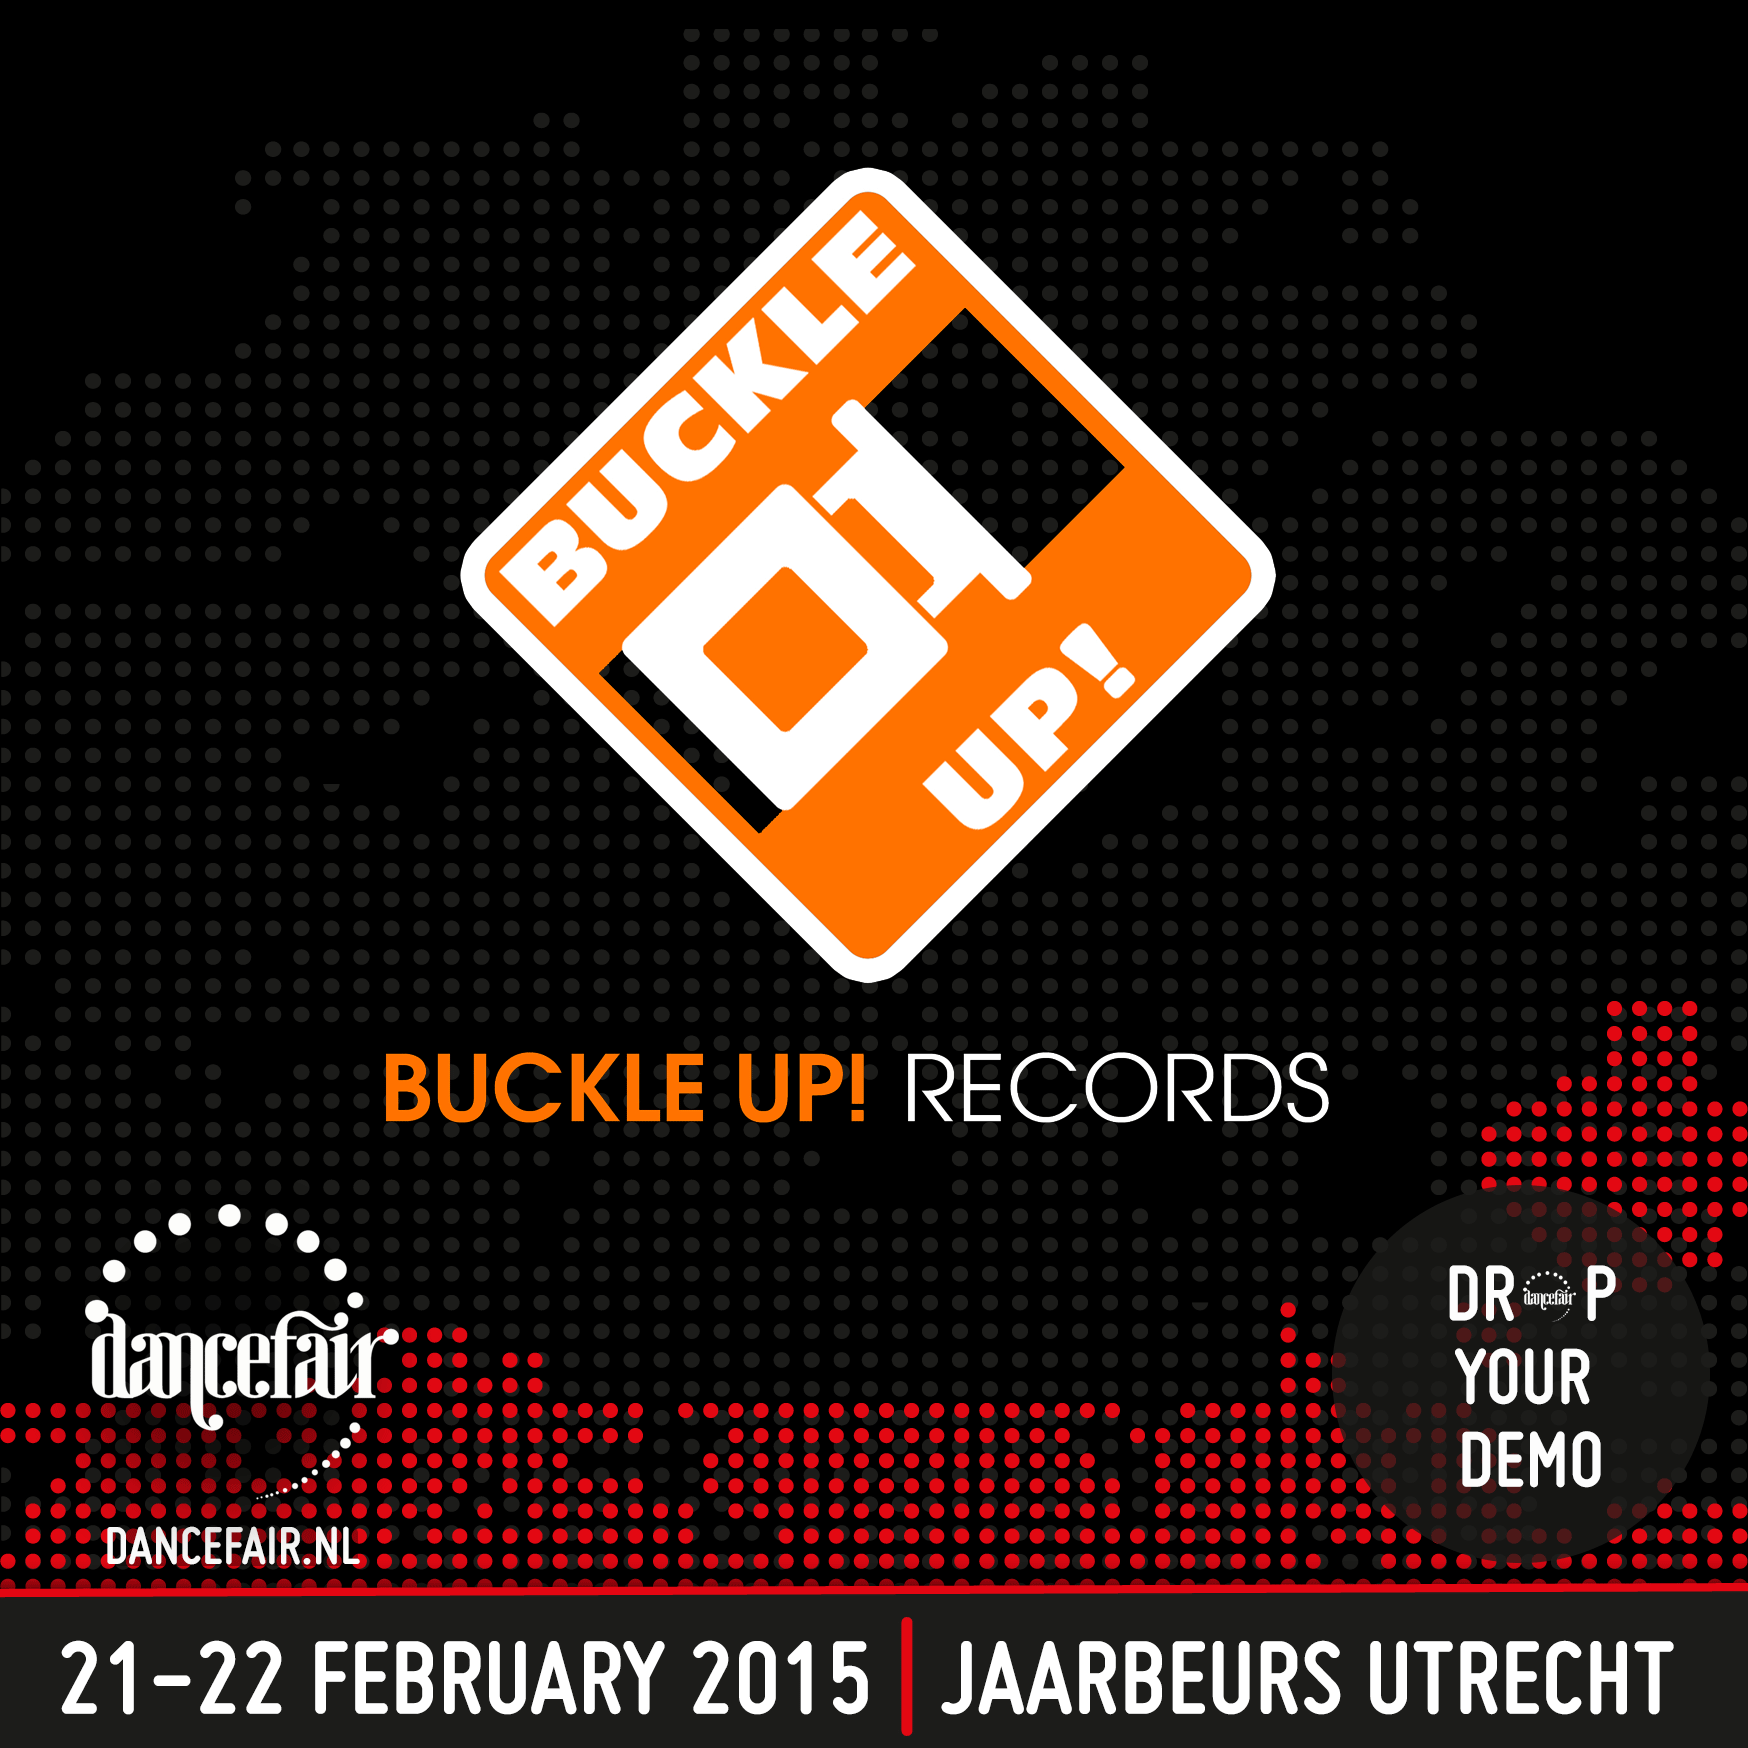 Buckle Up! Records is an independent label with the main focus on House music!